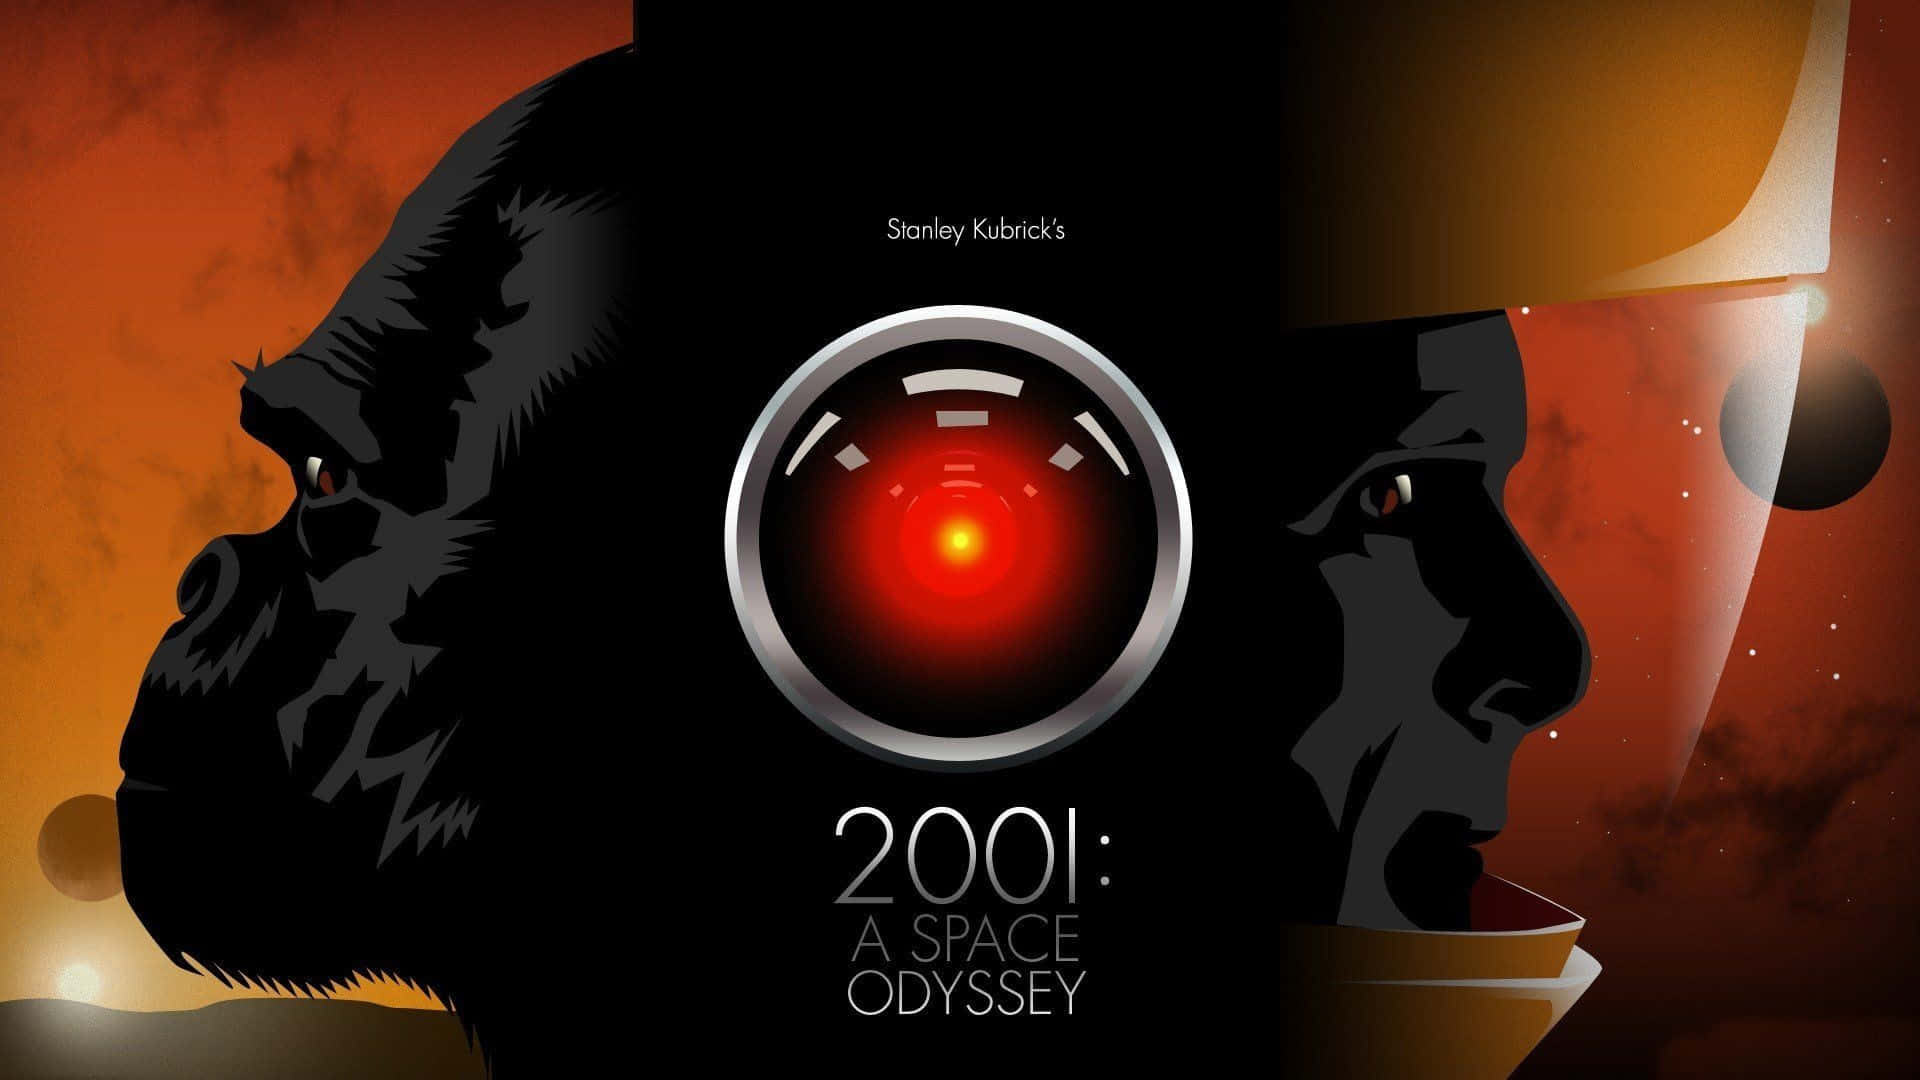 A scene from Stanley Kubrick's 2001 A Space Odyssey Wallpaper